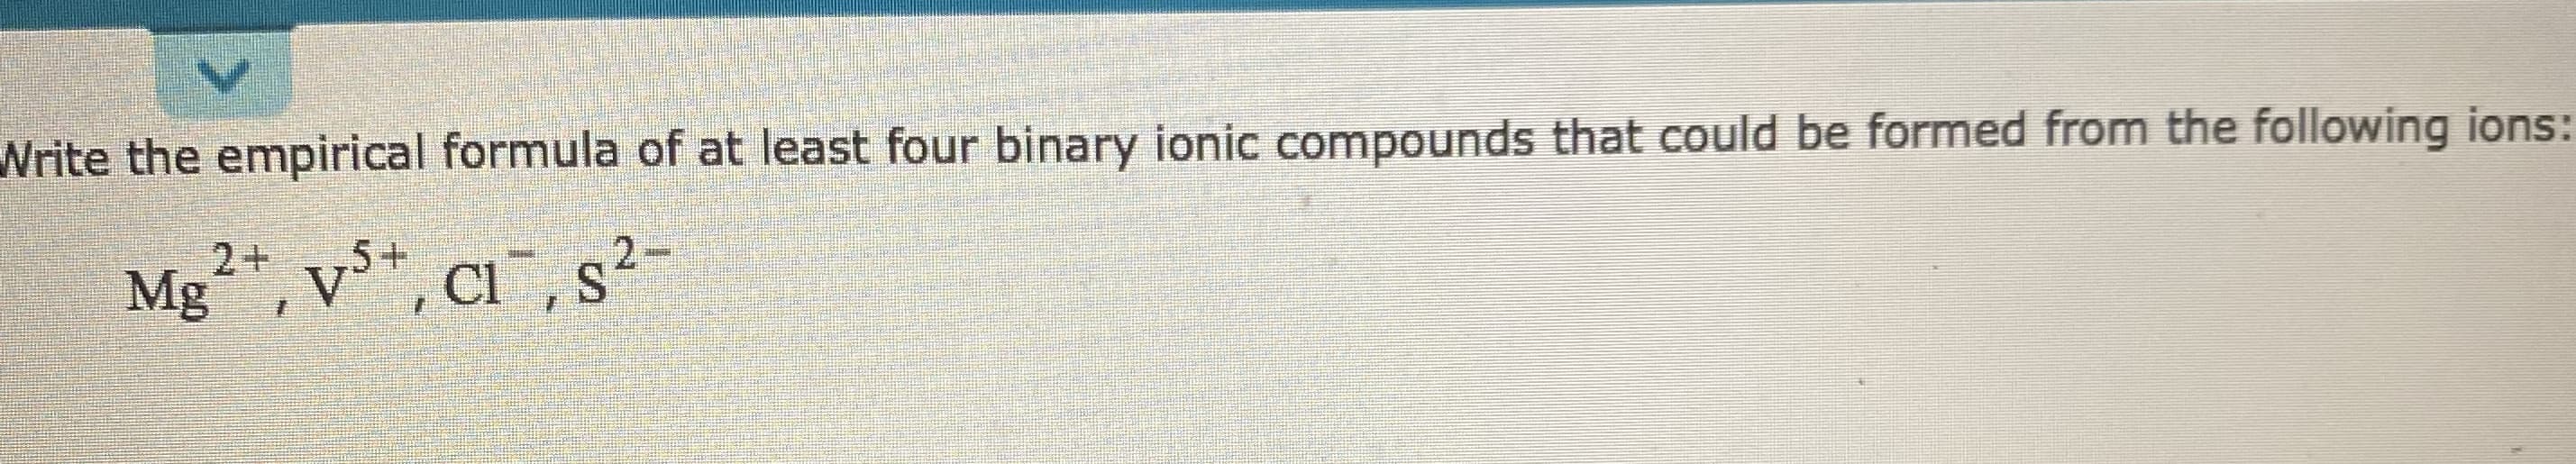 rite the empirical formula of at least four binary ionic compounds that could be
